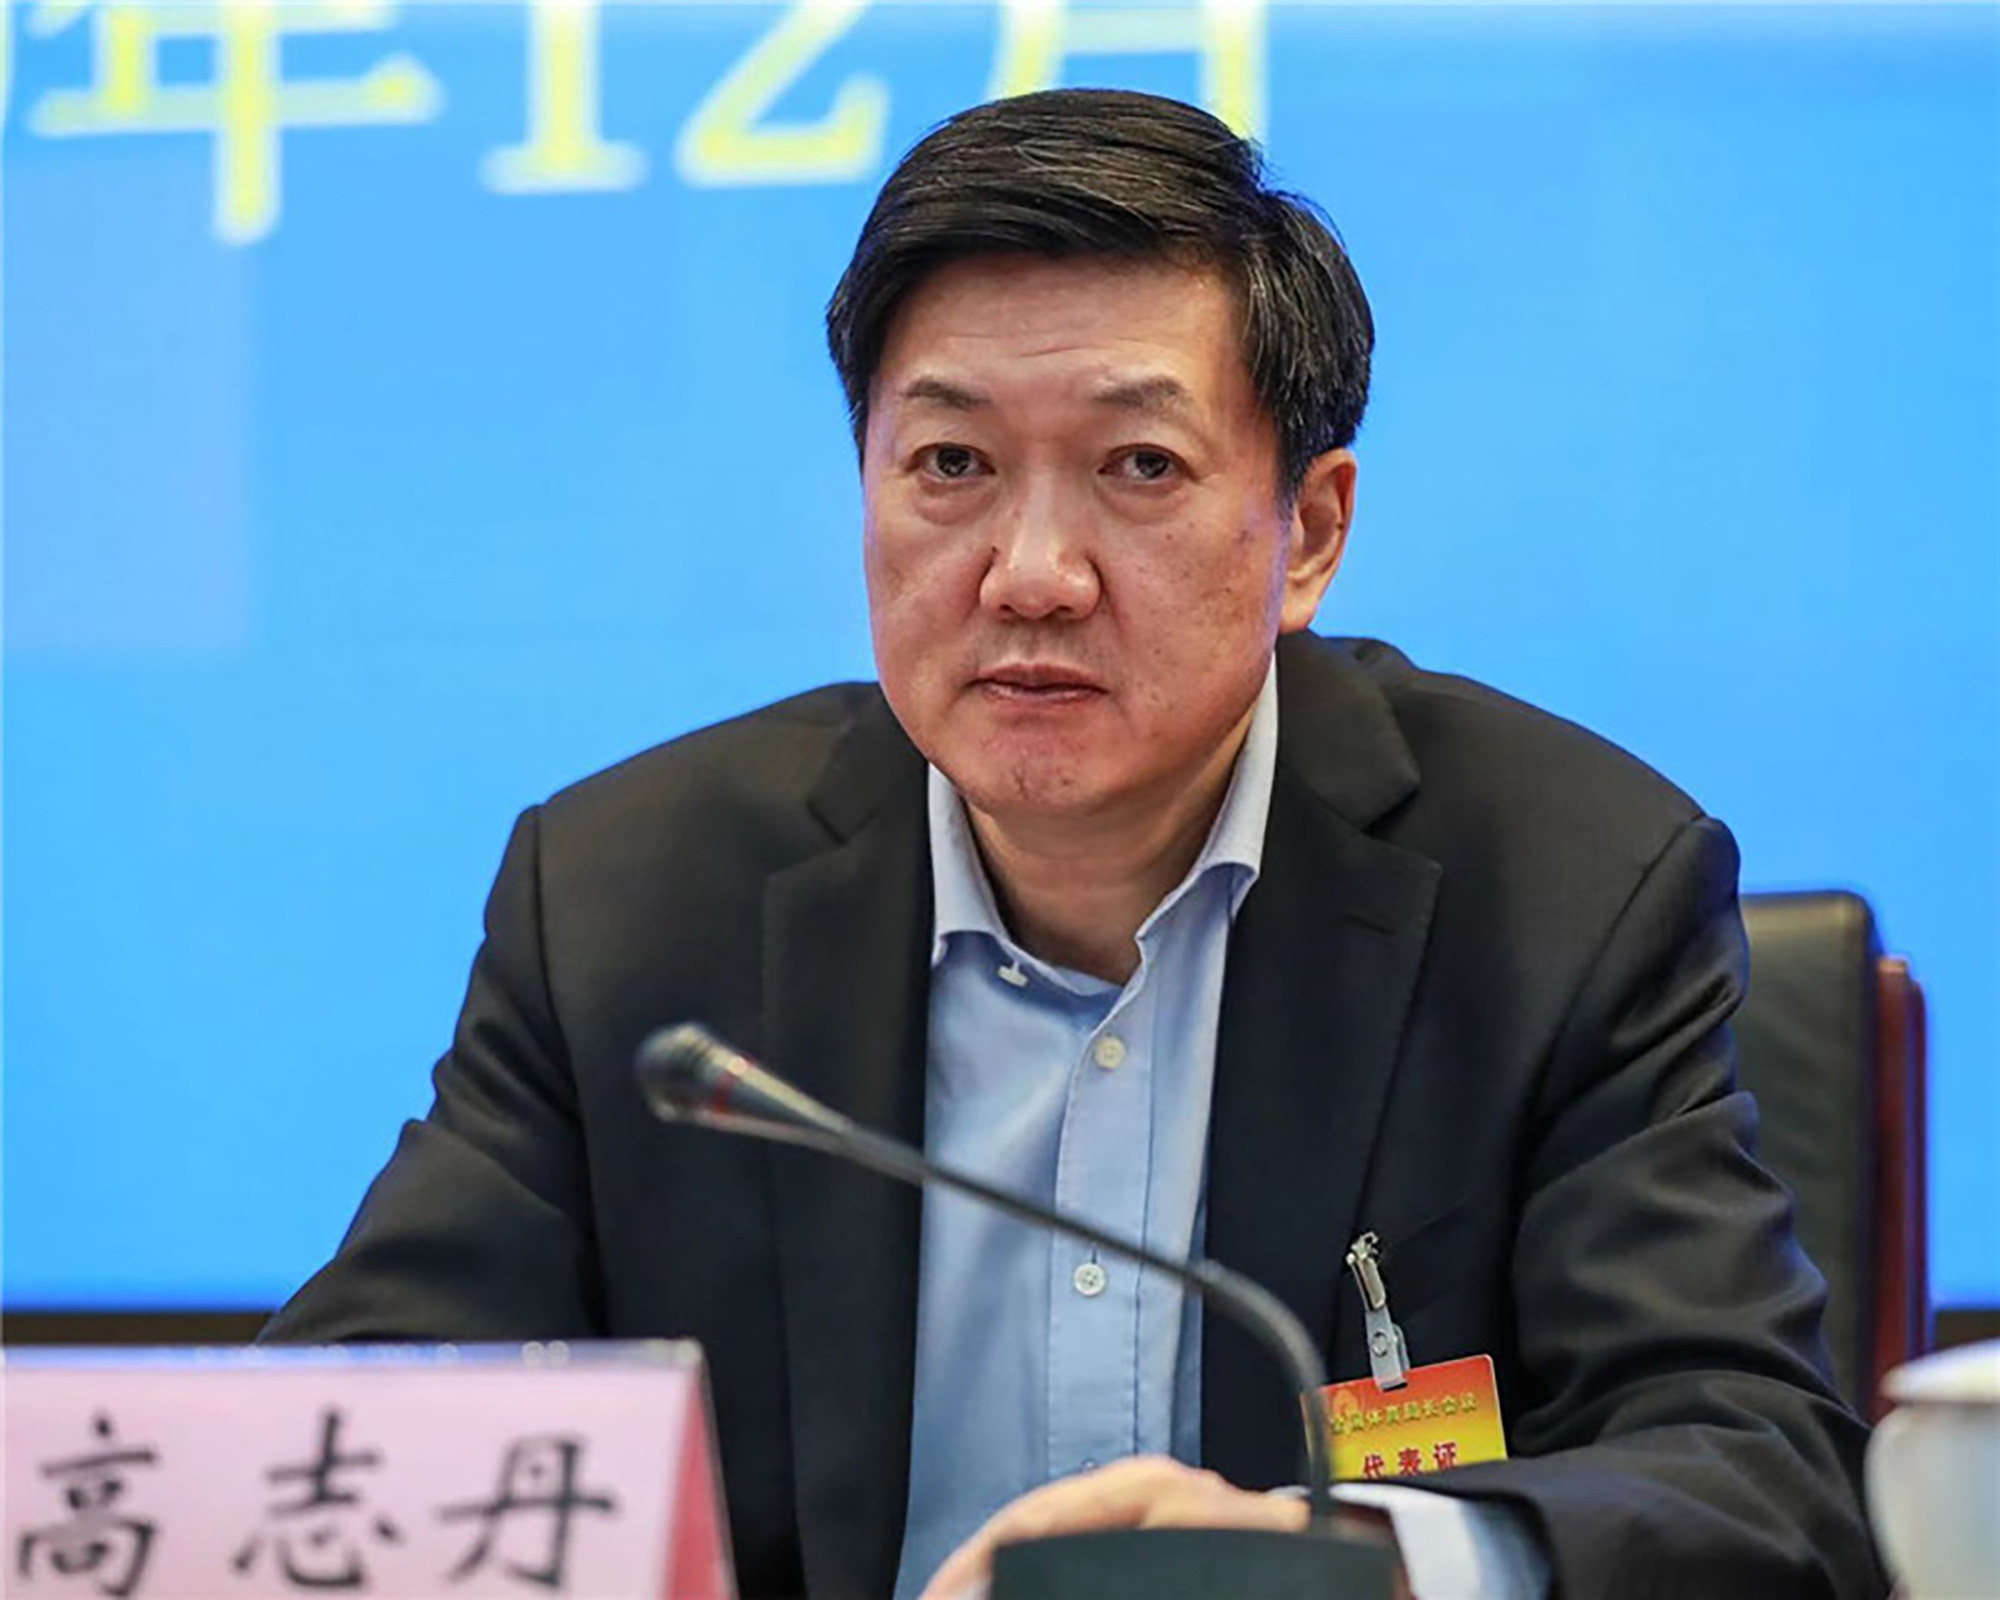 Gao Zhidan, head of the General Administration of Sport of China, says   “deviations” among cadres must be corrected. Photo: Handout